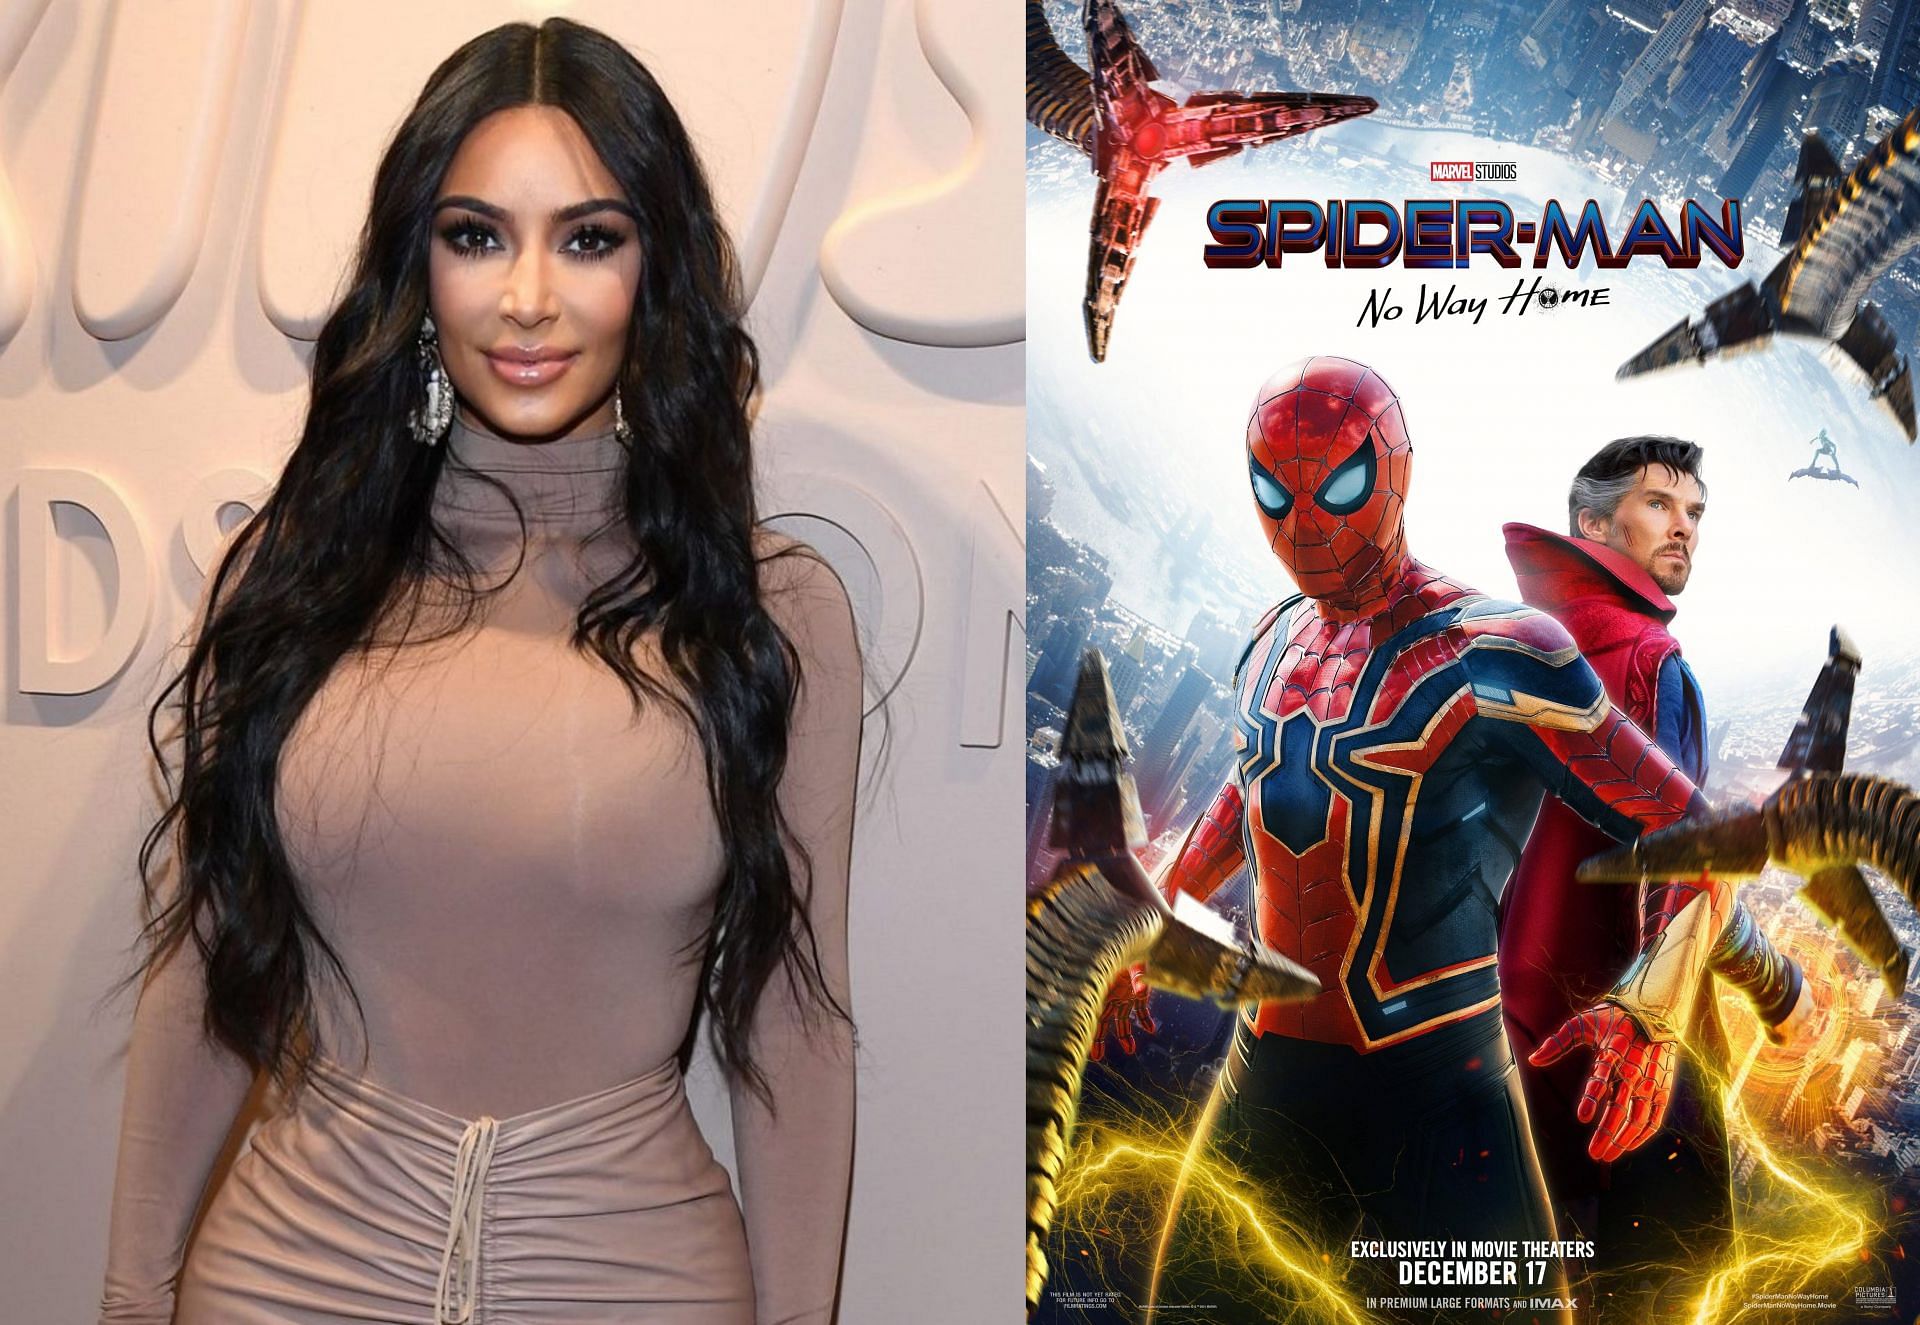 Kim Kardashian spoils No Way Home in Instagram story (Image via Kevin Mazur/ Getty Images, and Sony Pictures Entertainment/ Marvel Studios)